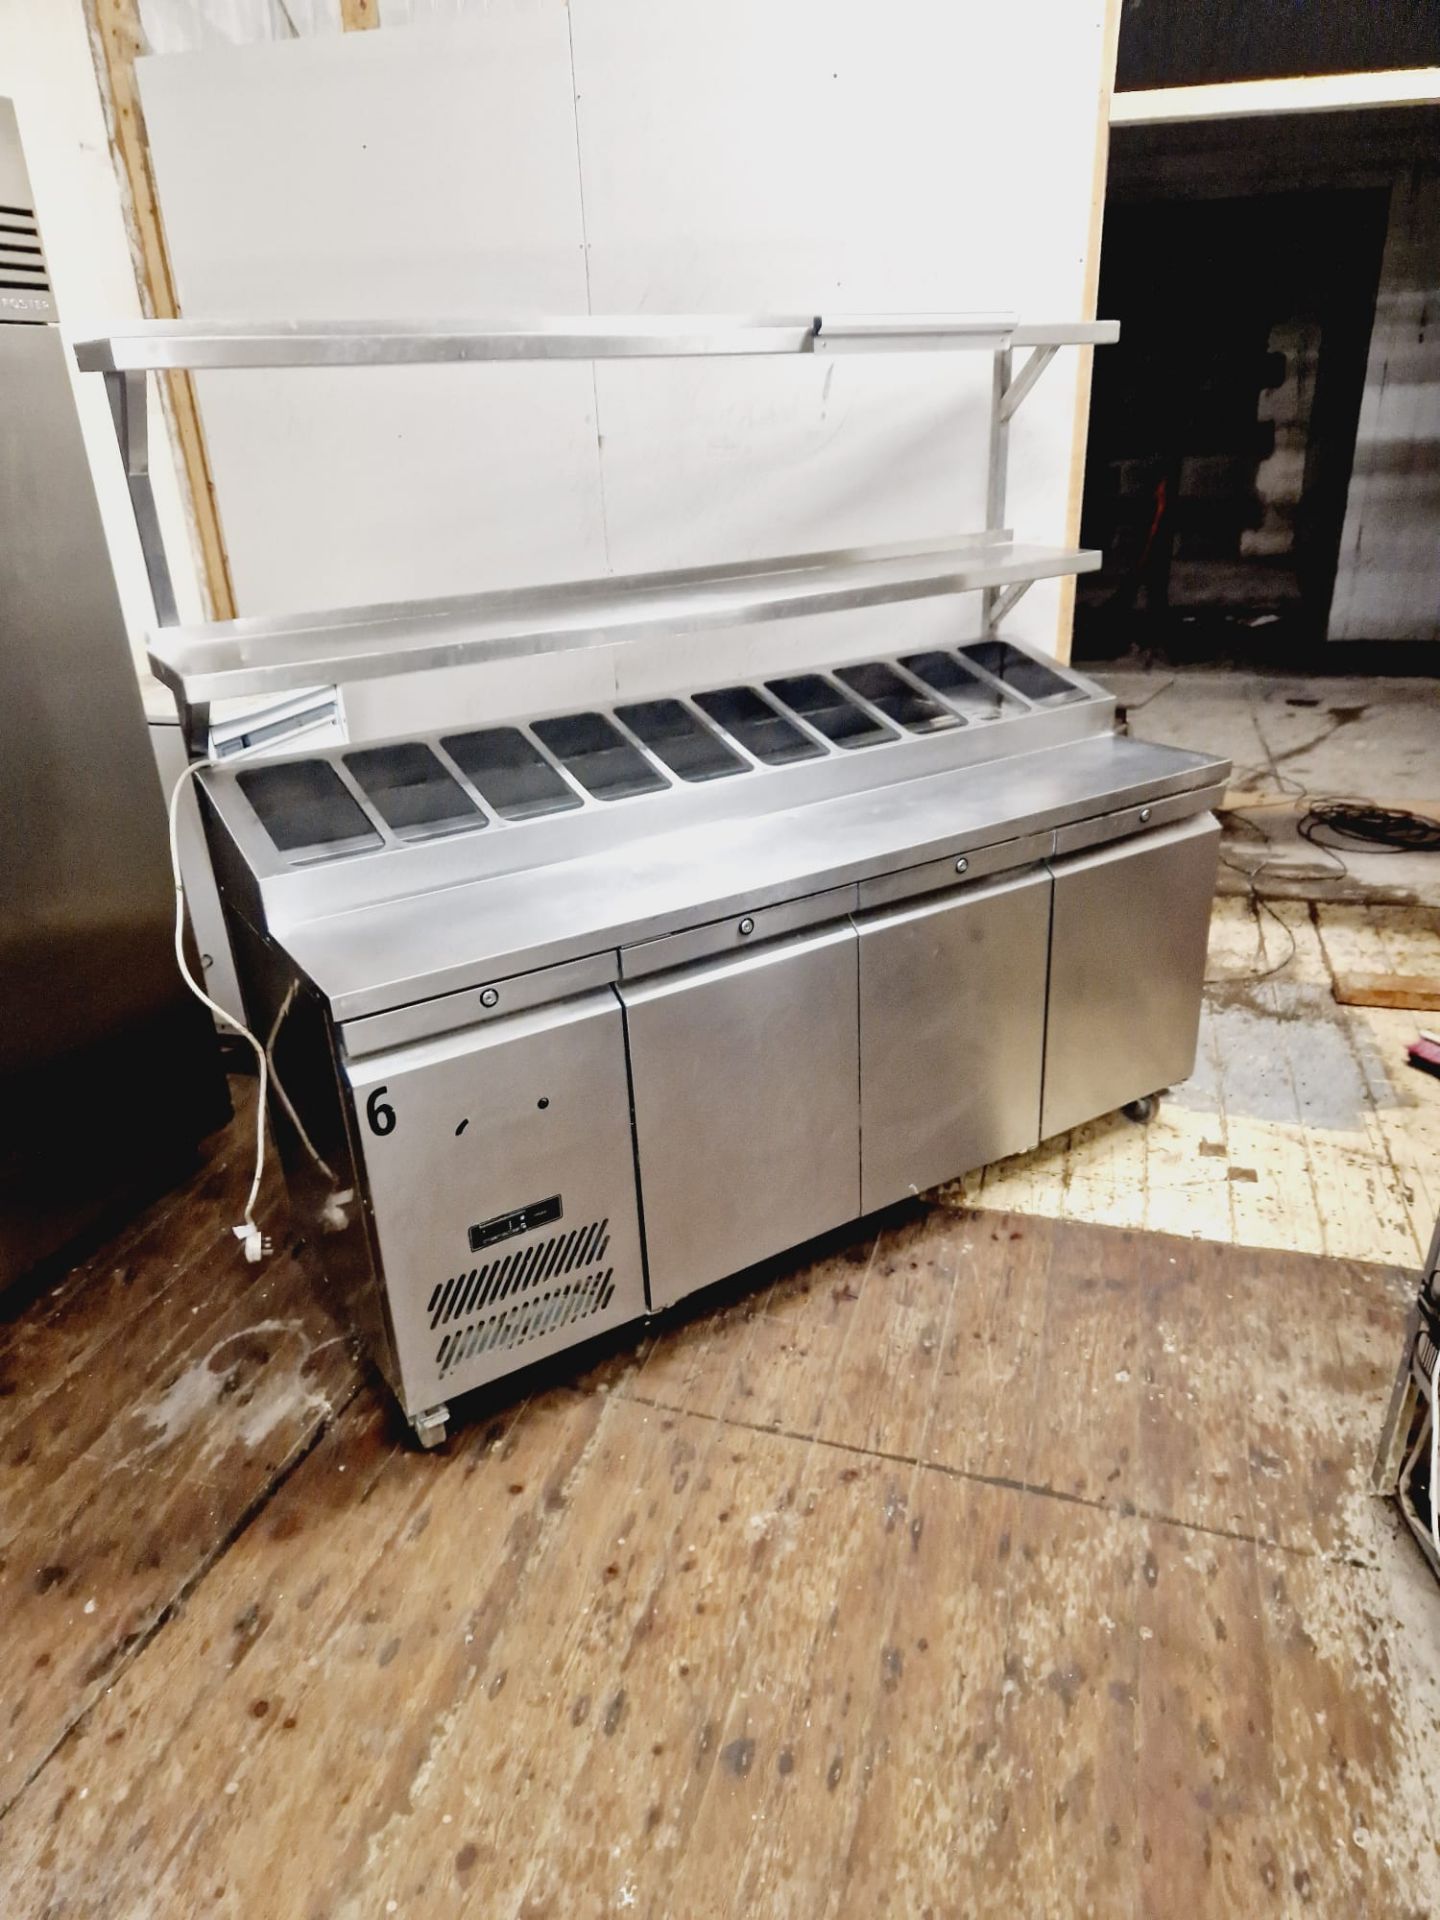 WILLIAMS 3 DOOR PIZZA PERP FRIDGE WITH SHELF -  SALAD BAR - FULLY WORKING AND SERVICED - Image 6 of 6